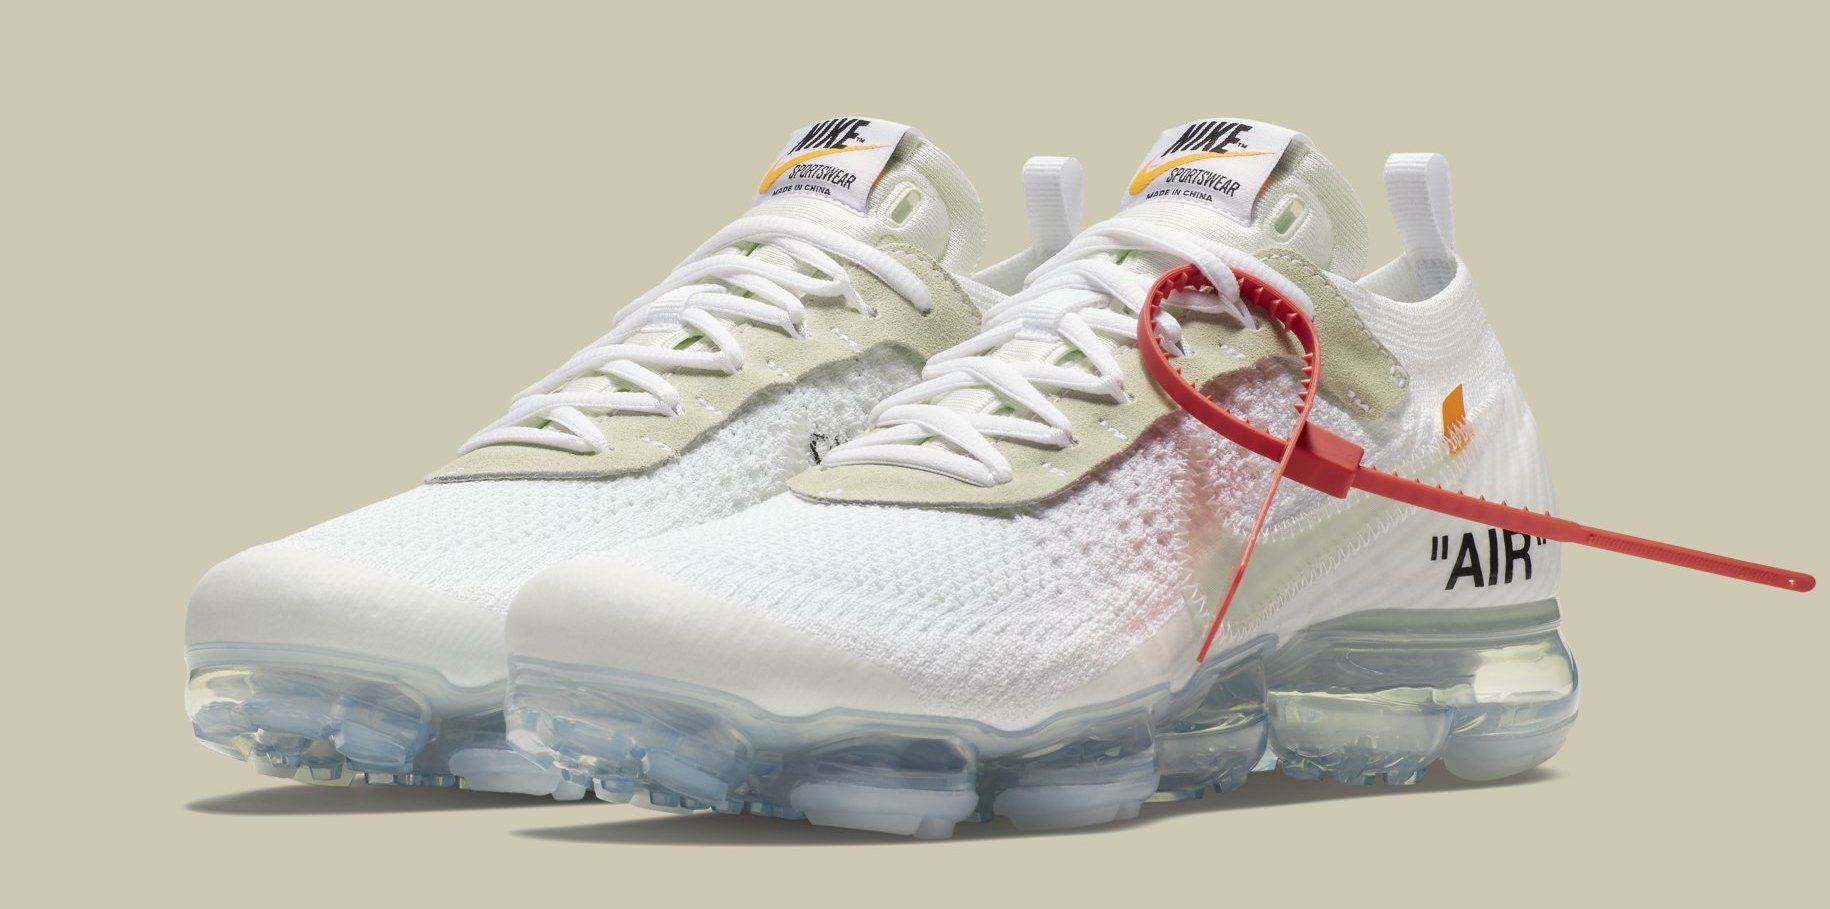 Virgl Abloh's New Off-White x VaporMax Drops This Weekend | Complex